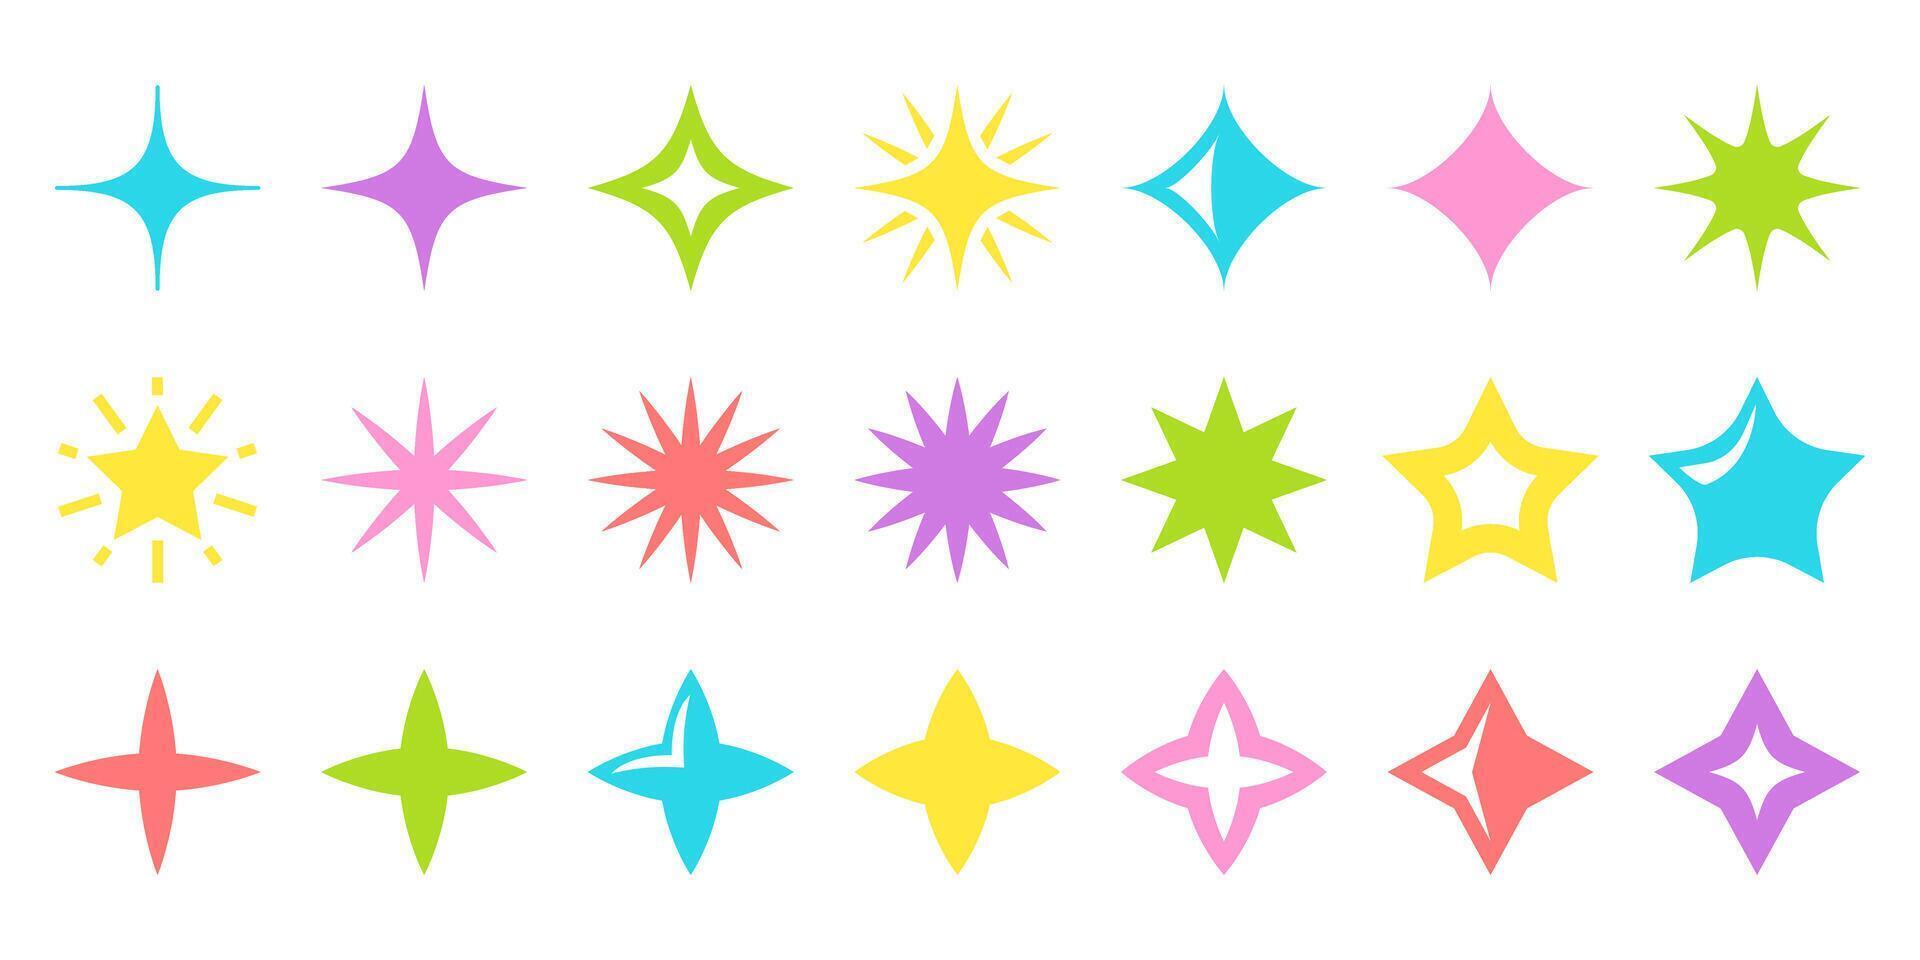 Color neon stars and sparkles icon set isolated on white background vector